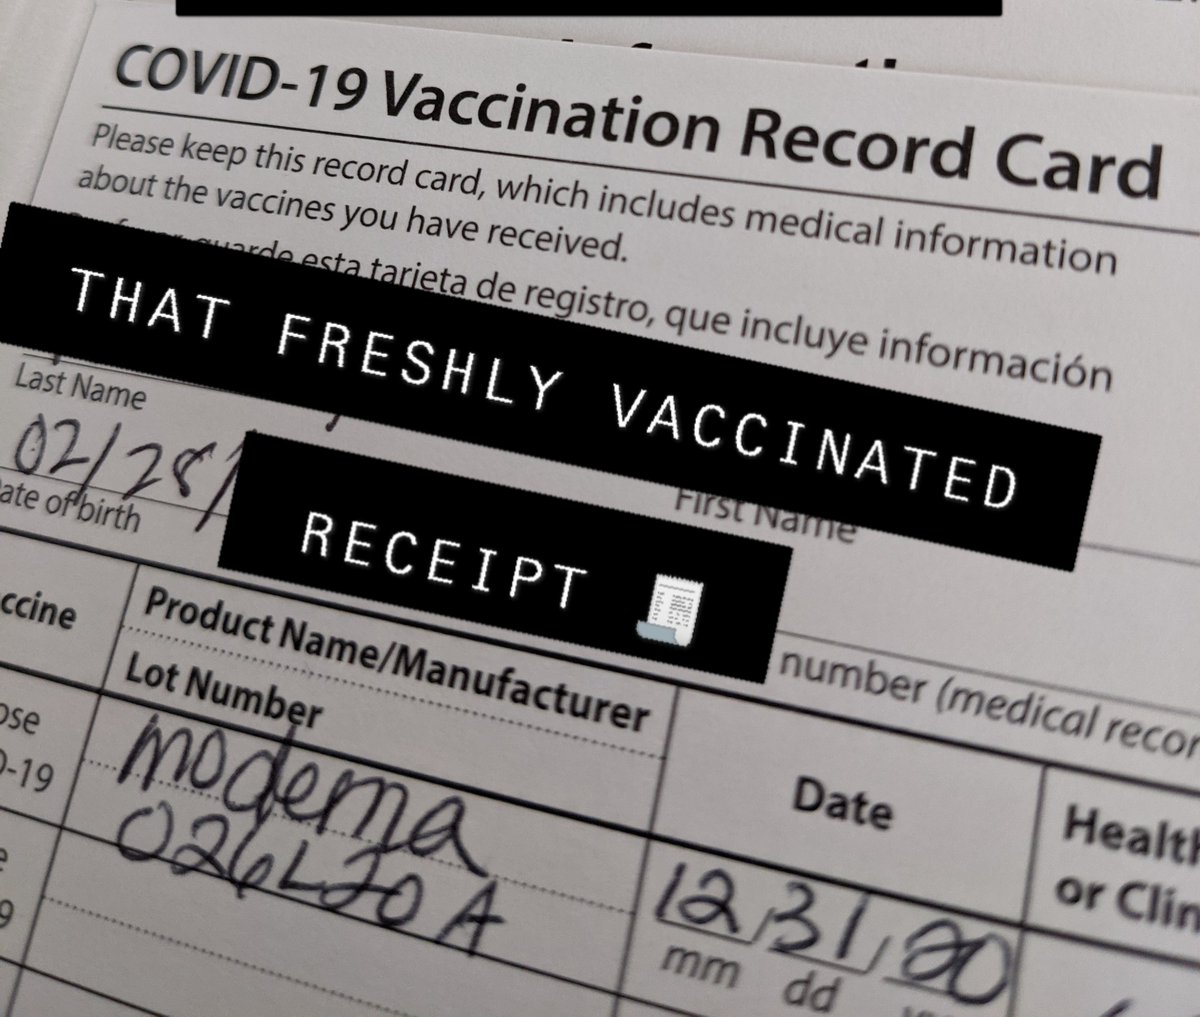 I was given a card which detailed the vaccine I got, where I got it, the date of my first shot and the date of my next shot. I will be emailed when I need to register again for my next dosage.  #CovidVaccine